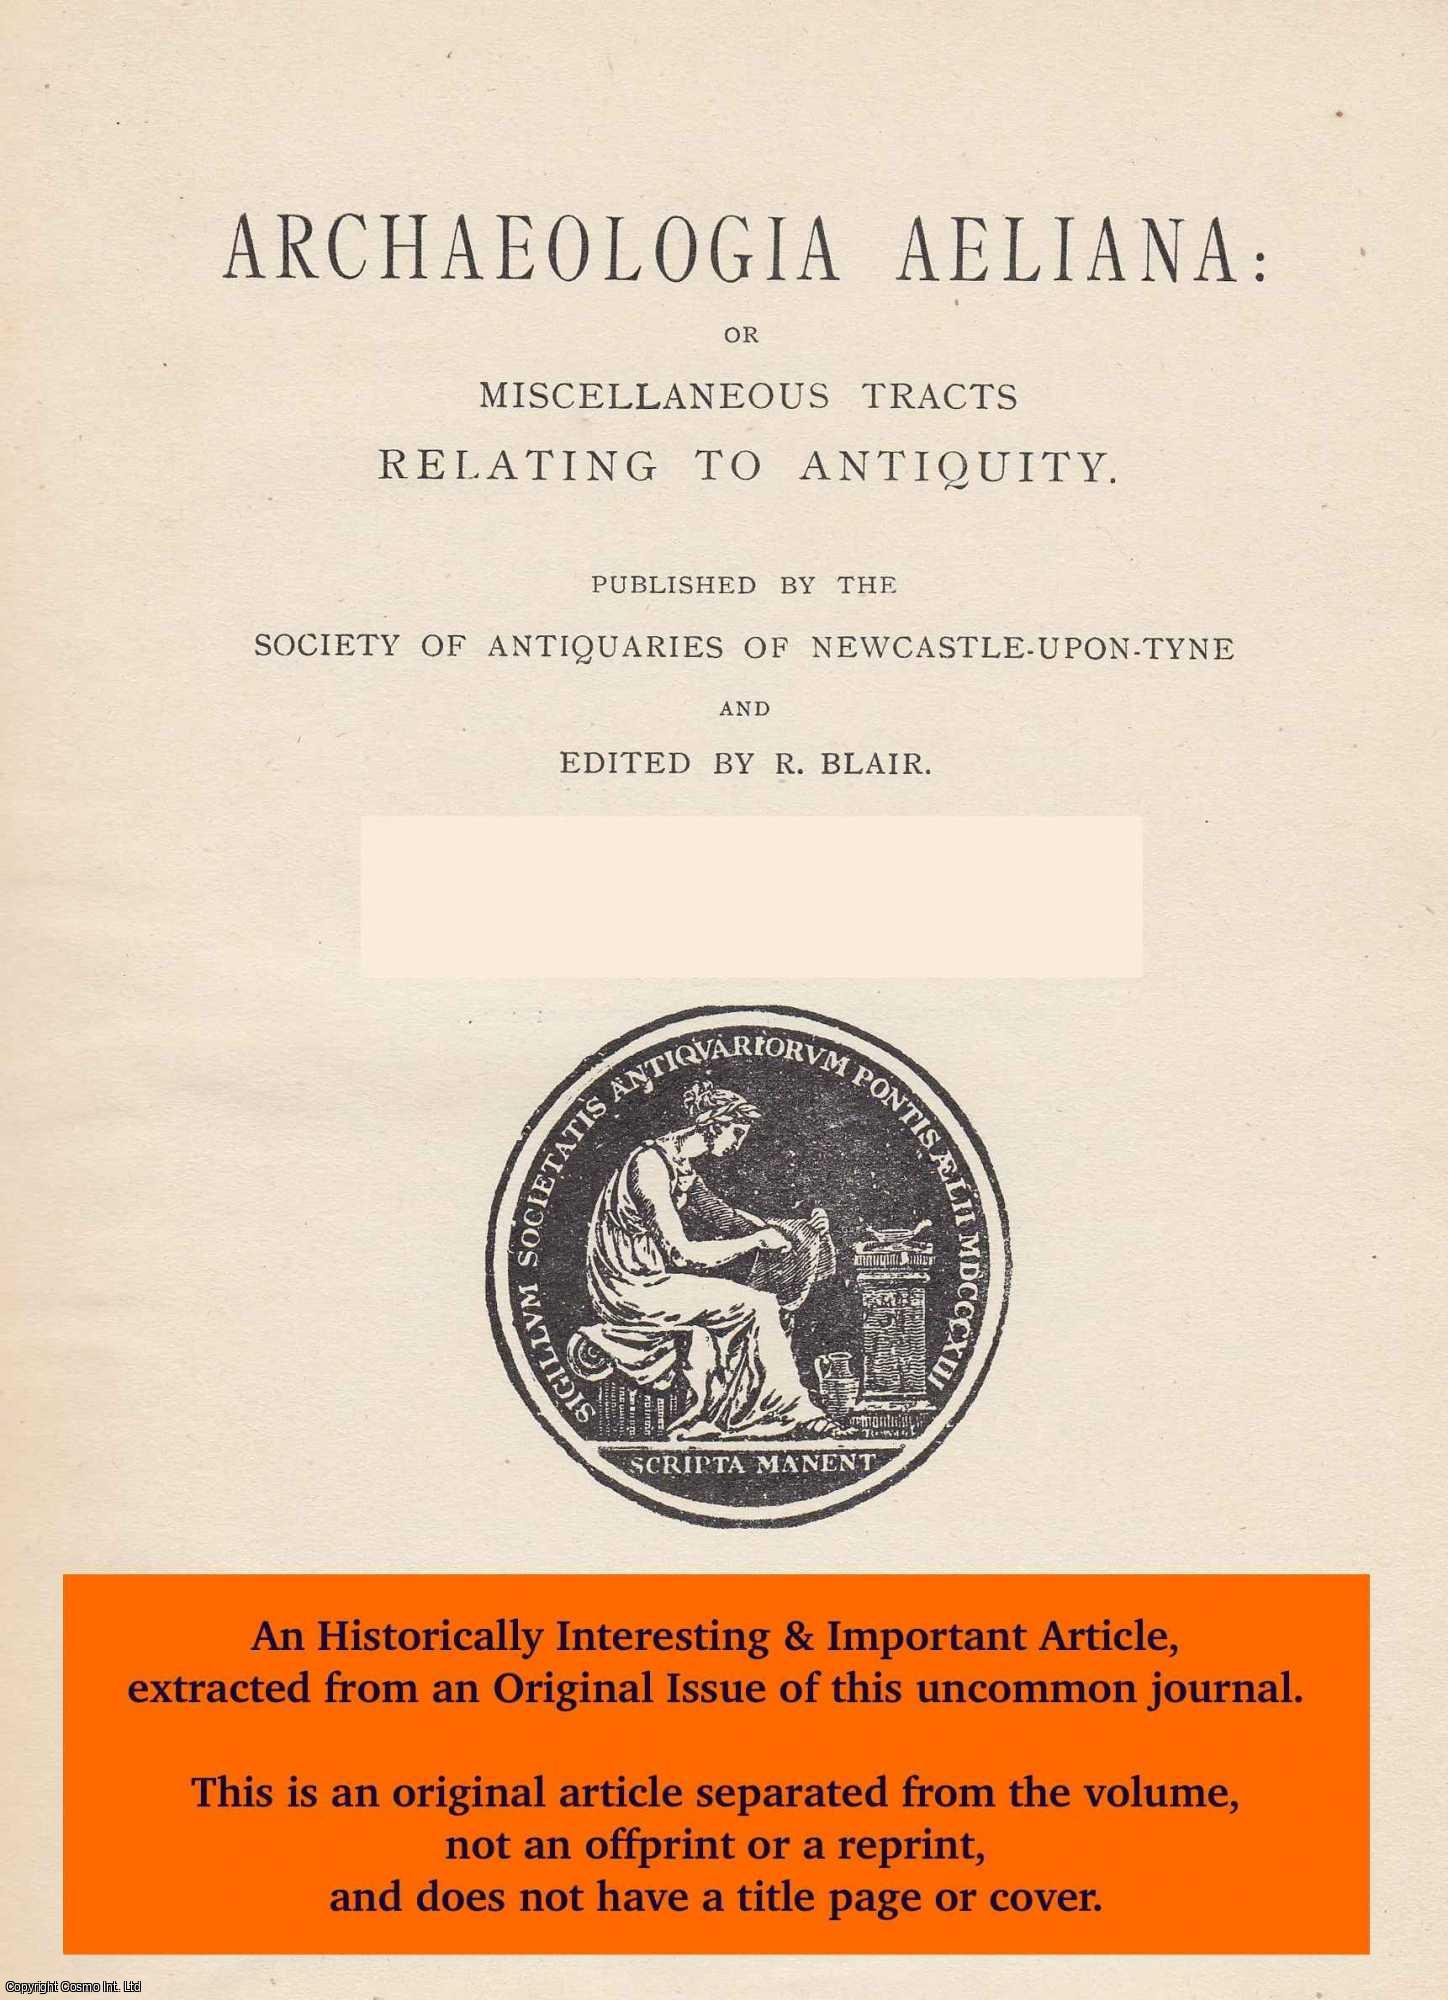 G.G. Baker-Cresswell & H. H. E. Craster, G. G. - The Descent of The Manor of Ellington. An original article from The Archaeologia Aeliana: or Miscellaneous Tracts Relating to Antiquity, 1928.